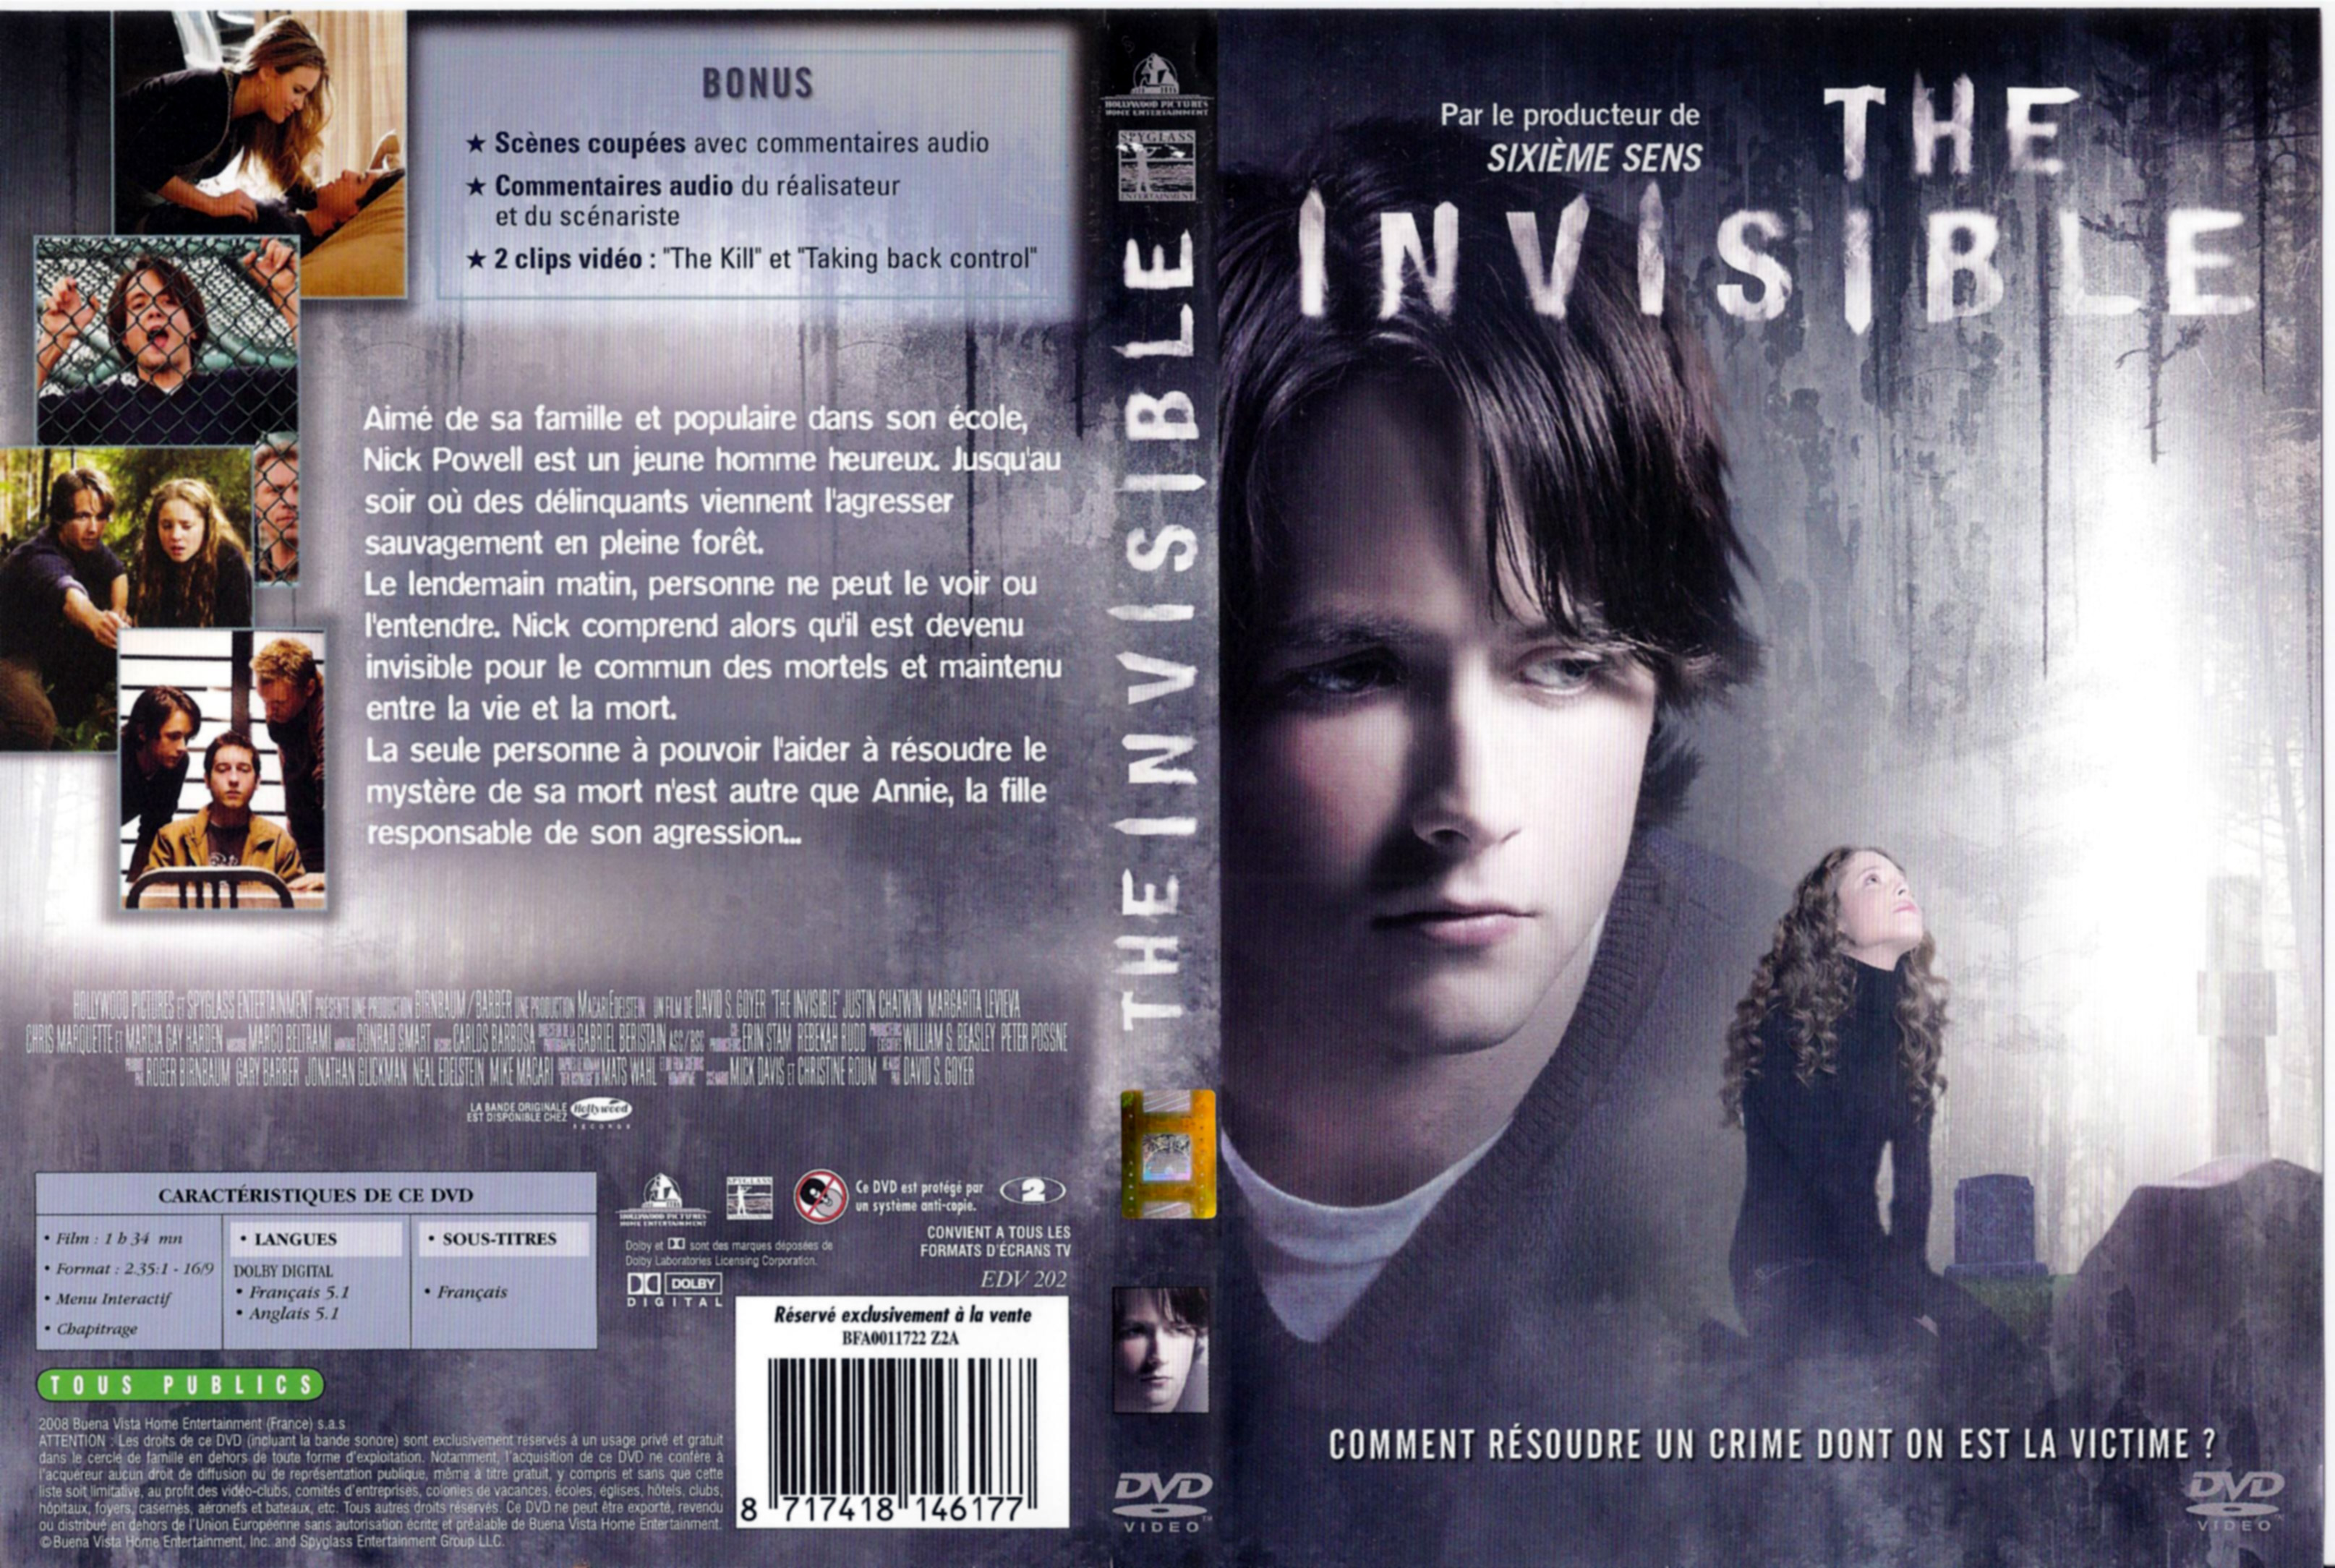 Jaquette DVD The invisible